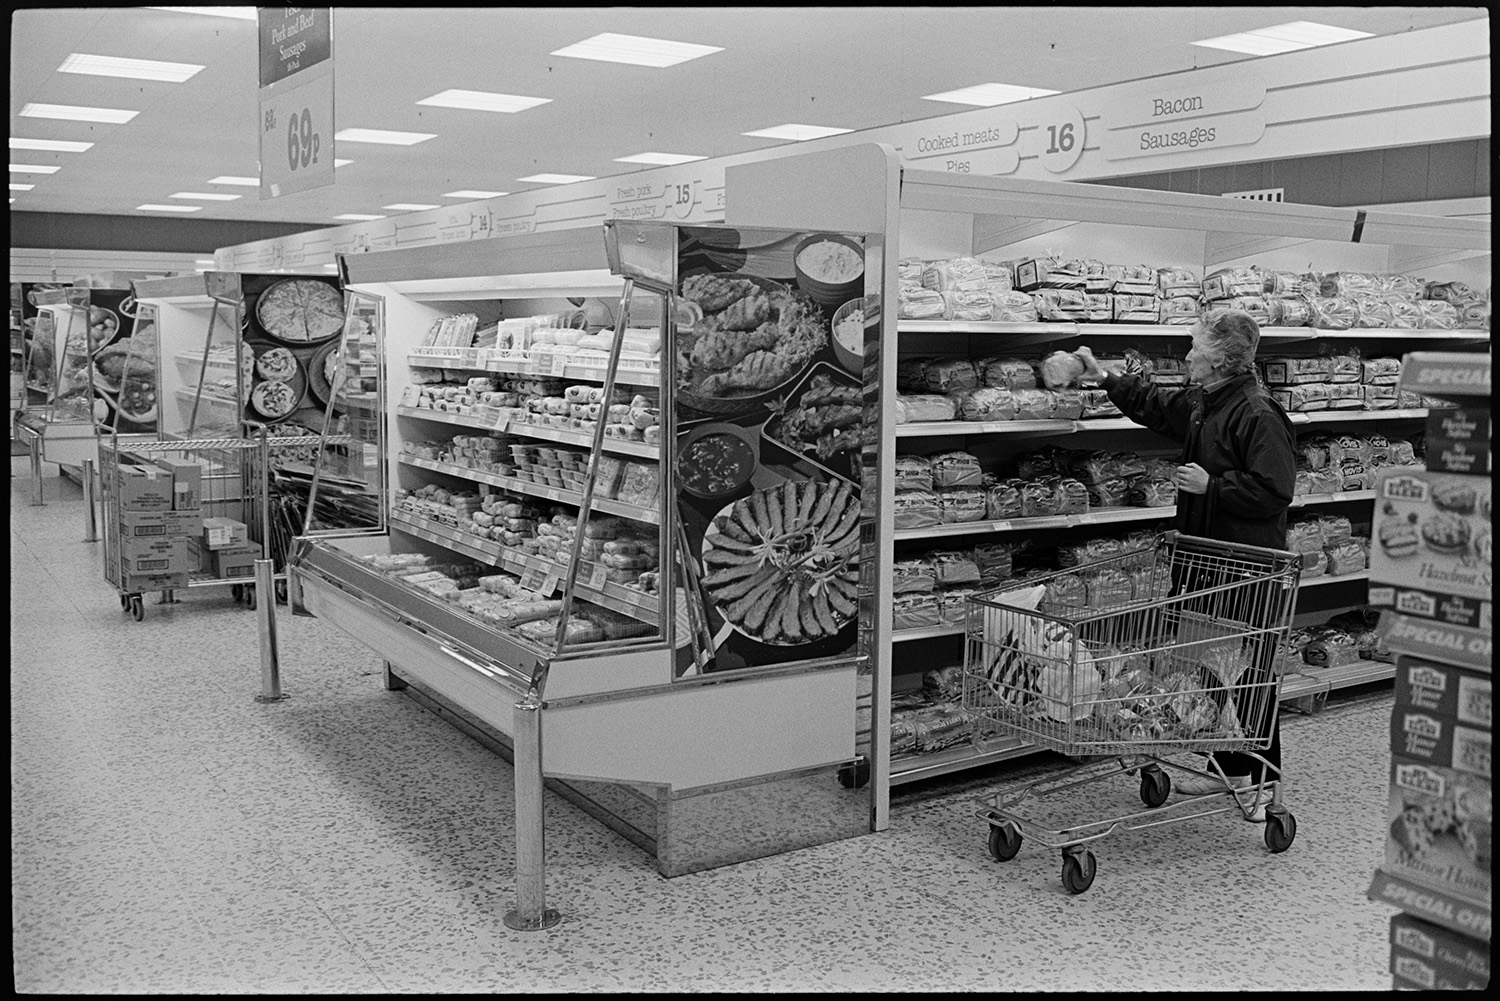 Interior of supermarket with people shopping, delivery lorry being unloaded. 
[A woman selecting a loaf of bread from a shelf on the bakery aisle in the Tesco supermarket in Barnstaple. Cabinets with chilled goods can be seen on the ends of the aisles.]